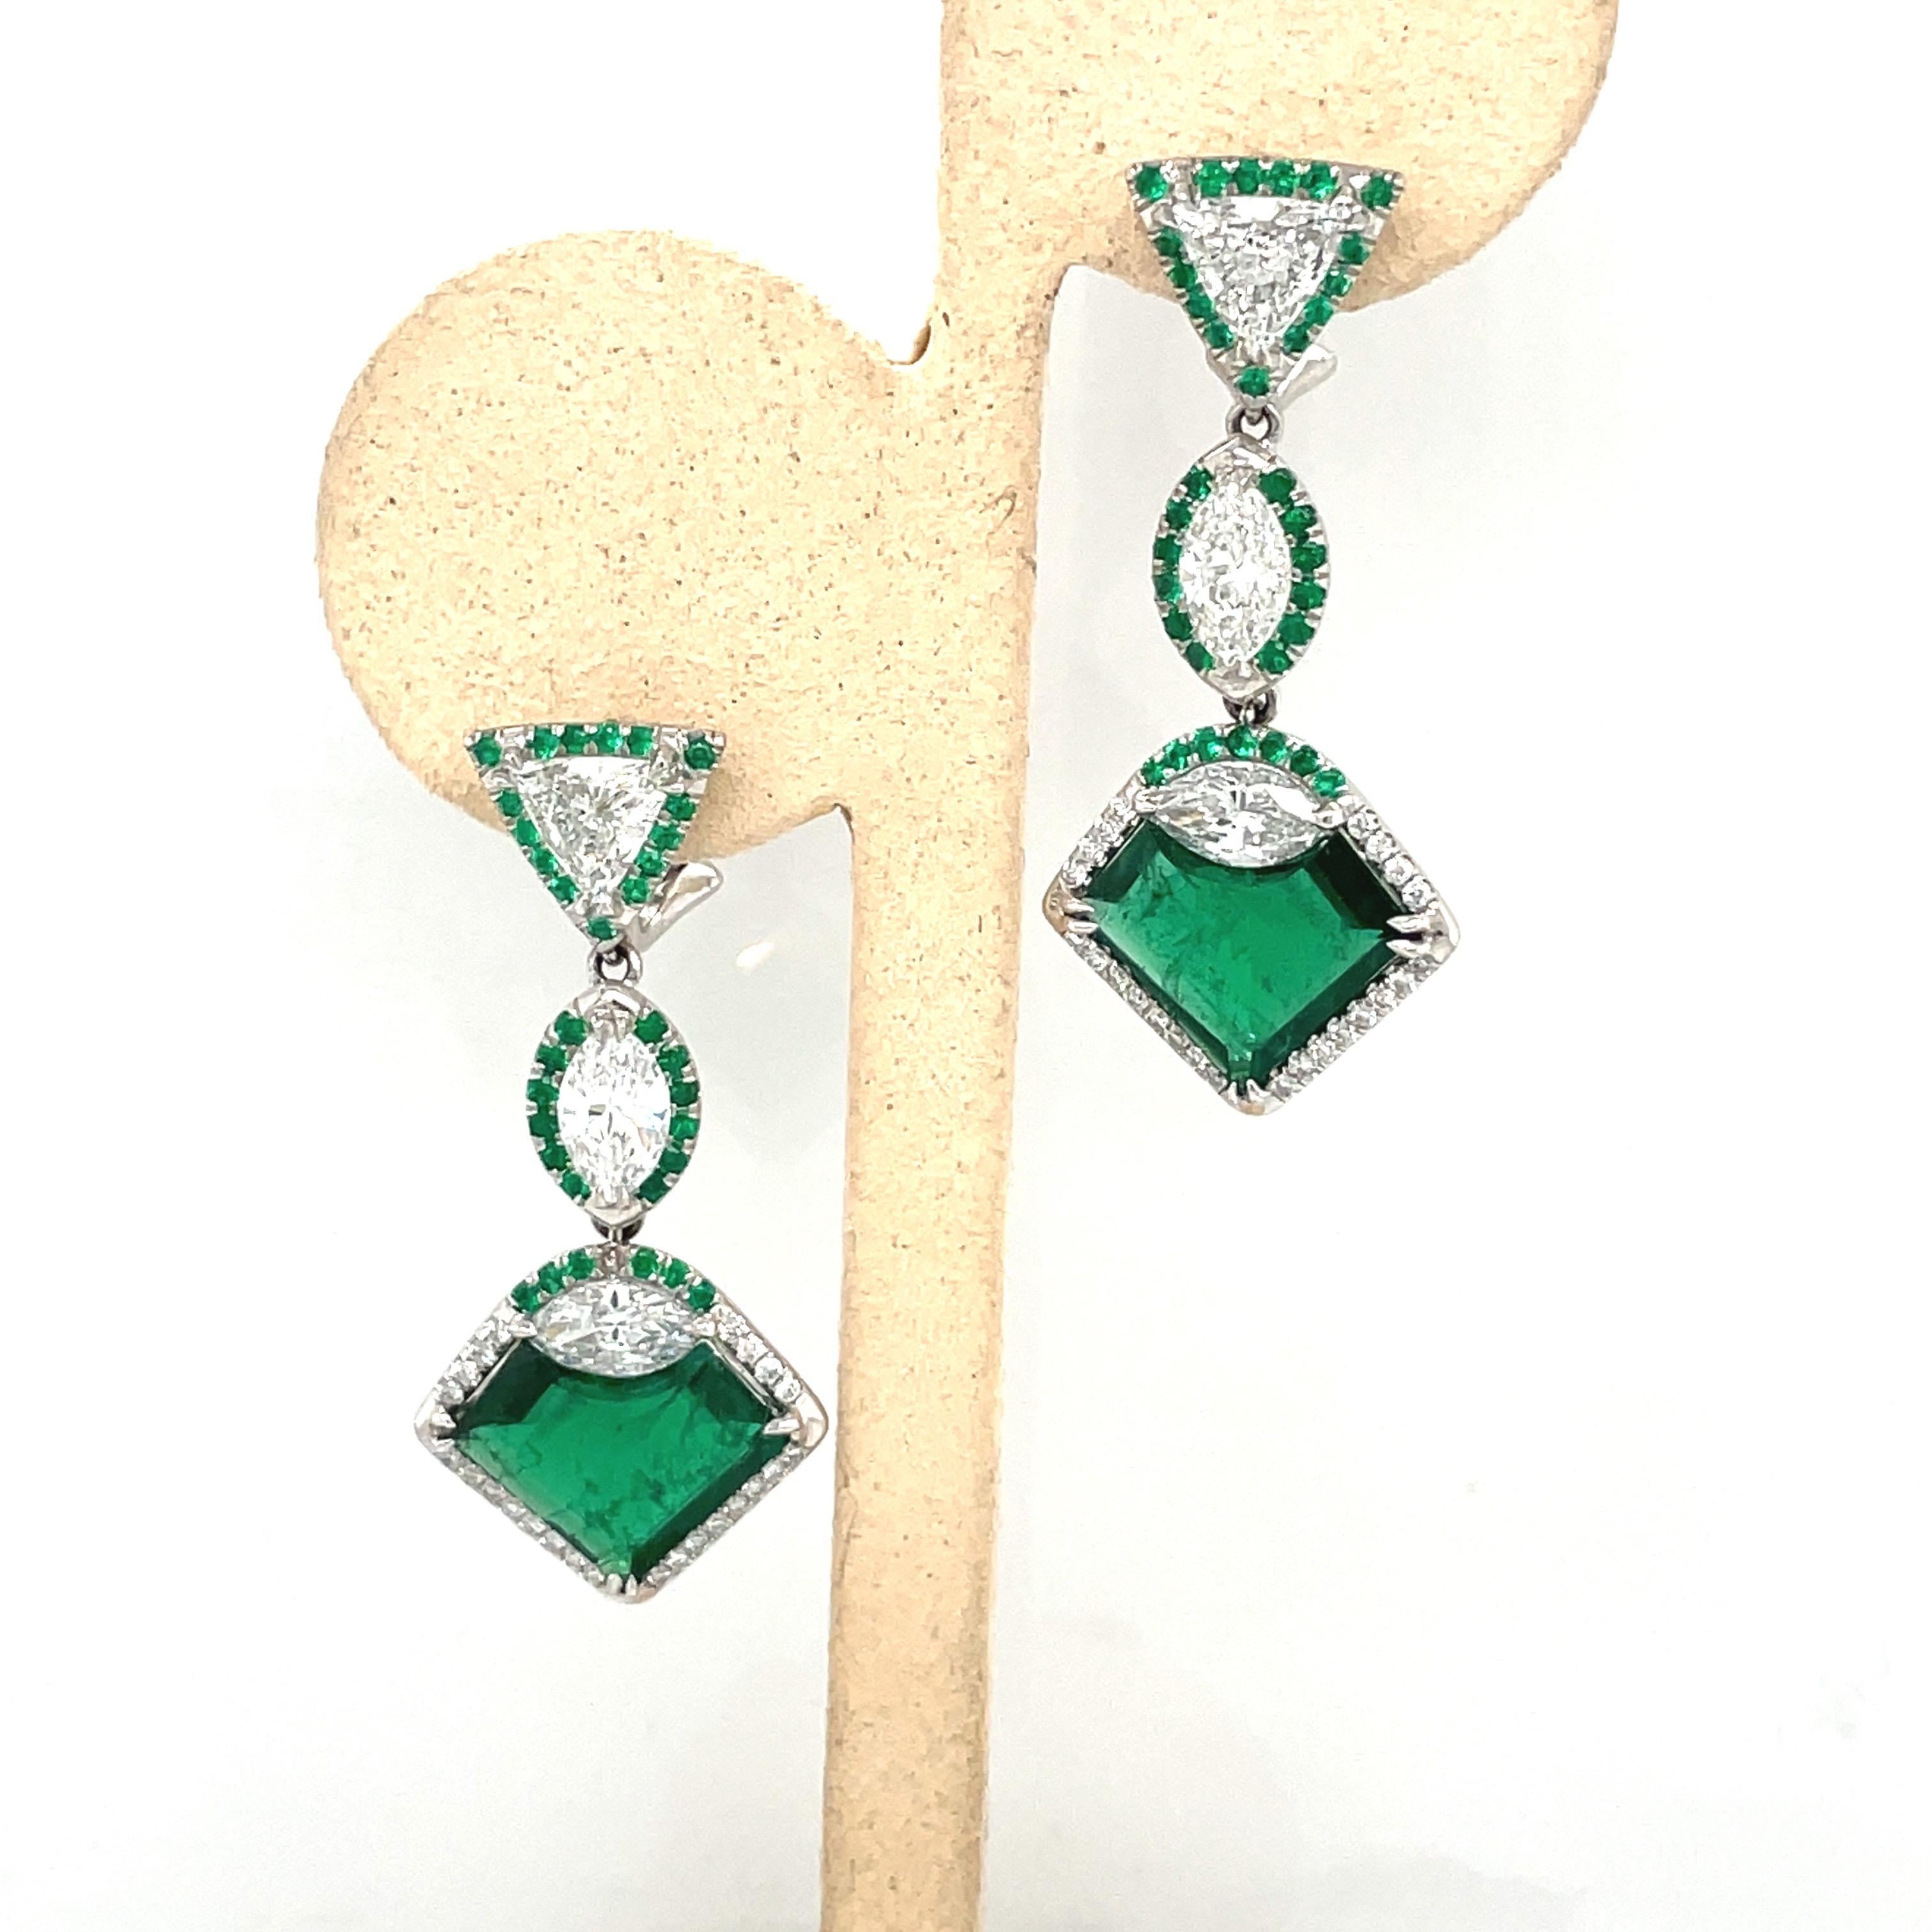 Absolutely breathtaking art deco inspired emerald and diamond earrings. Designed with 2 gem quality heart shaped emeralds weighing 6.74 carats. There are 2 trillion diamonds of F color VS clarity weighing 1.47 carats, and 4 marquise diamonds F color